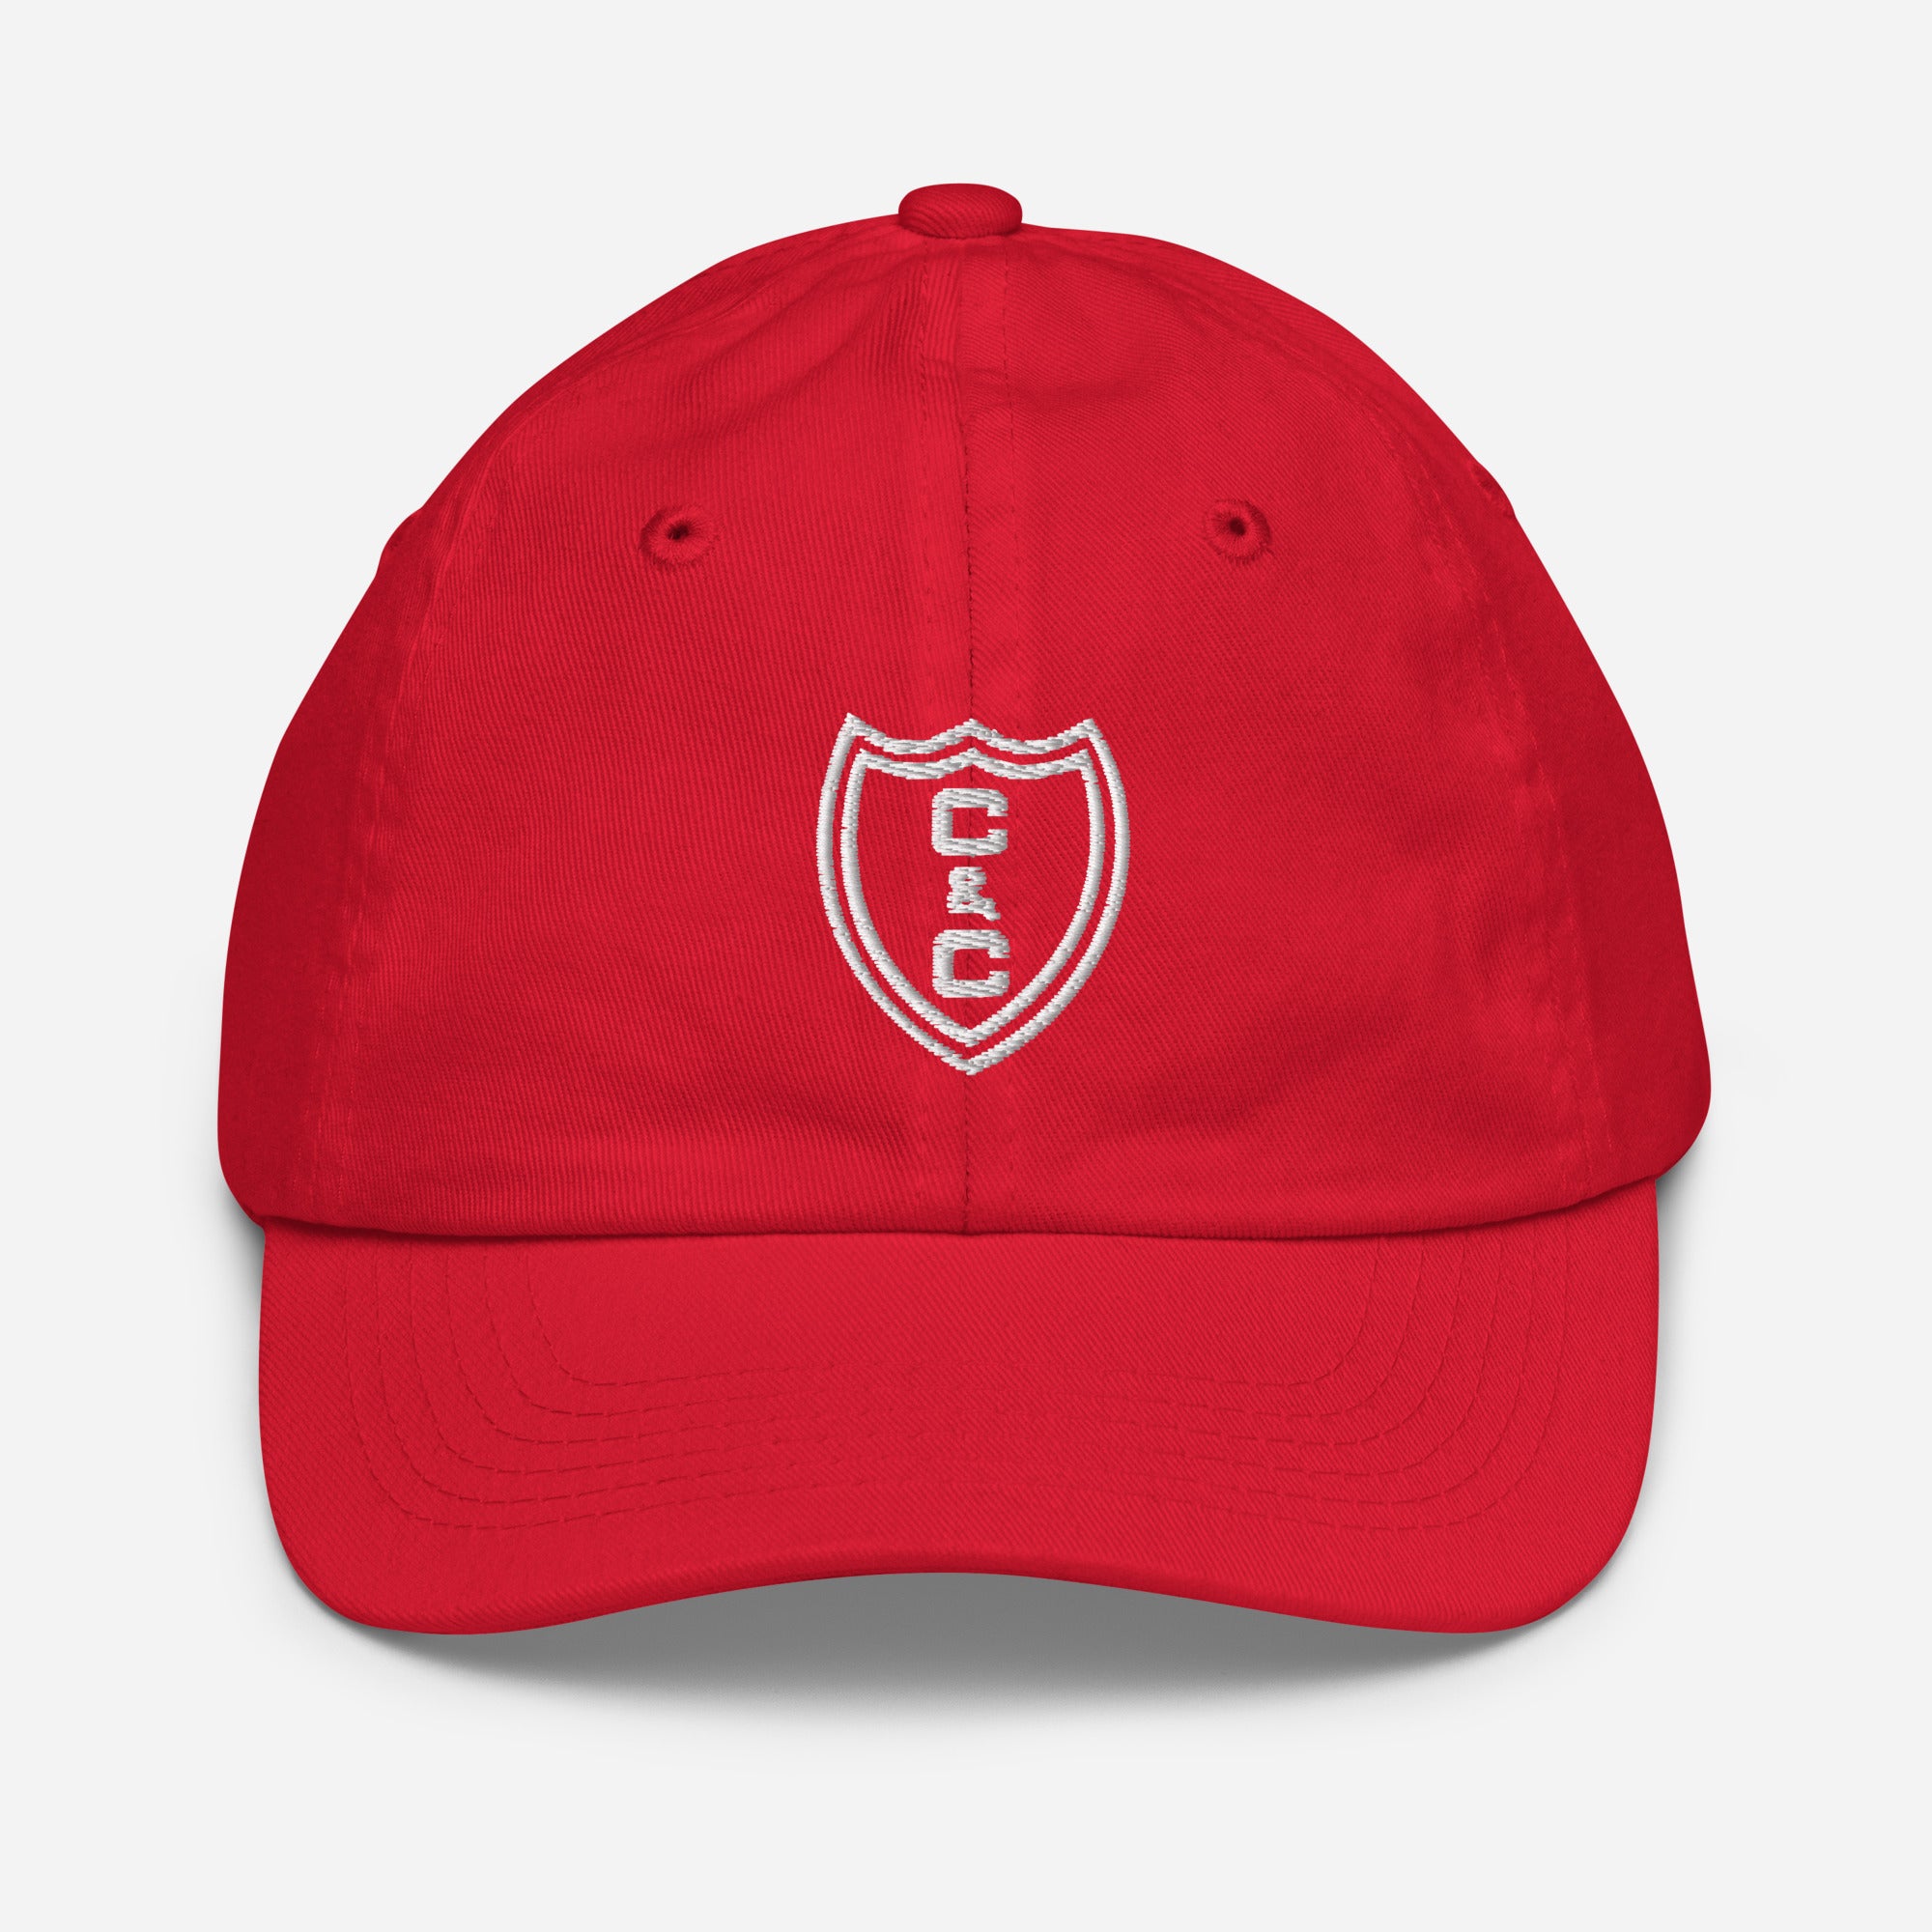 C&C Youth Cap- White Embroidery (Multiple Color Options)